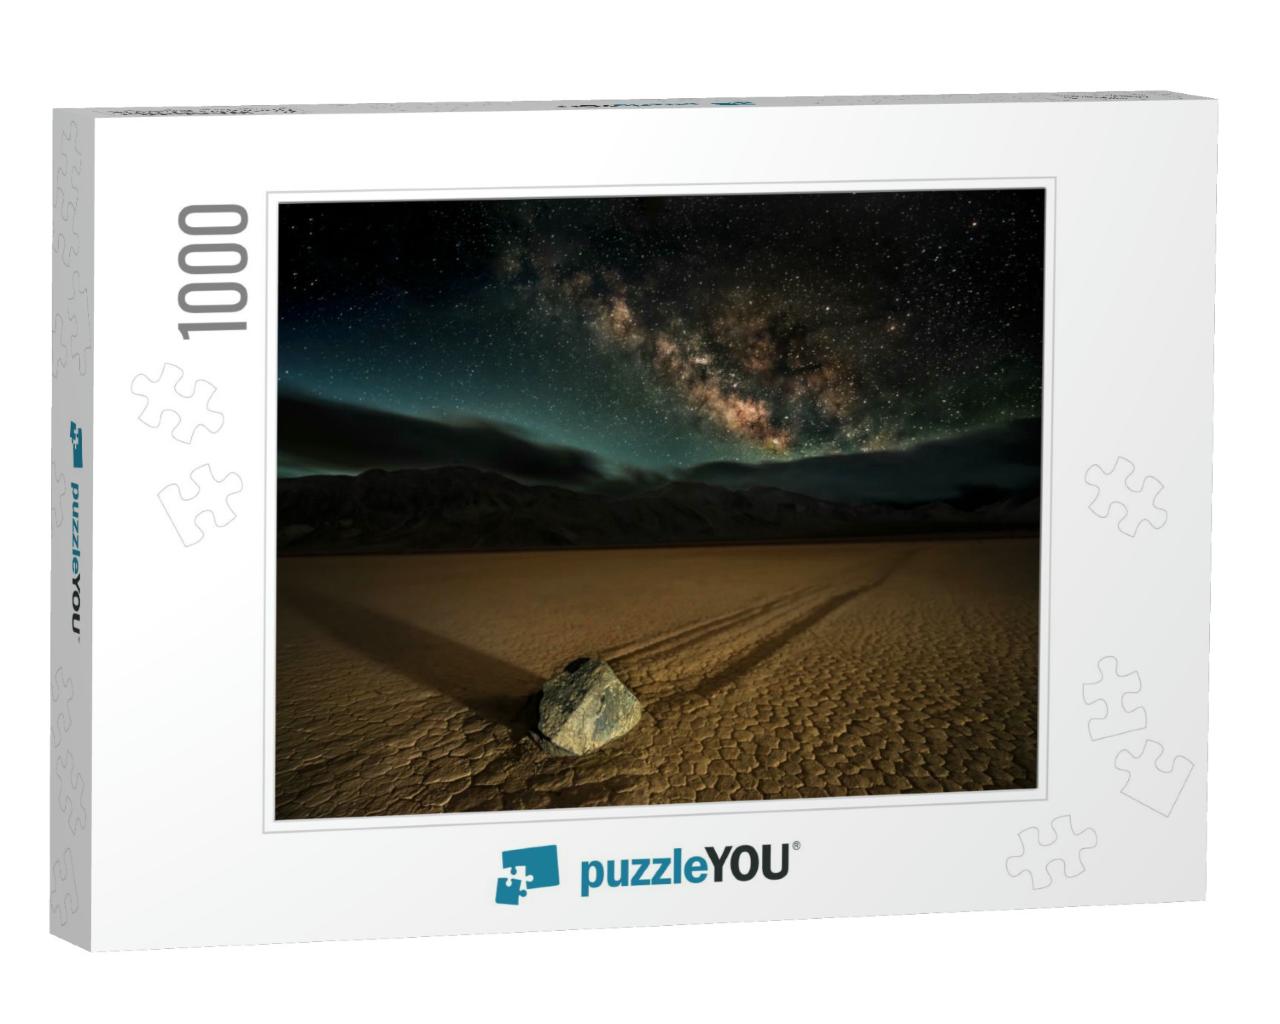 Racetrack Playa. a Sailing Stone Photographed A... Jigsaw Puzzle with 1000 pieces